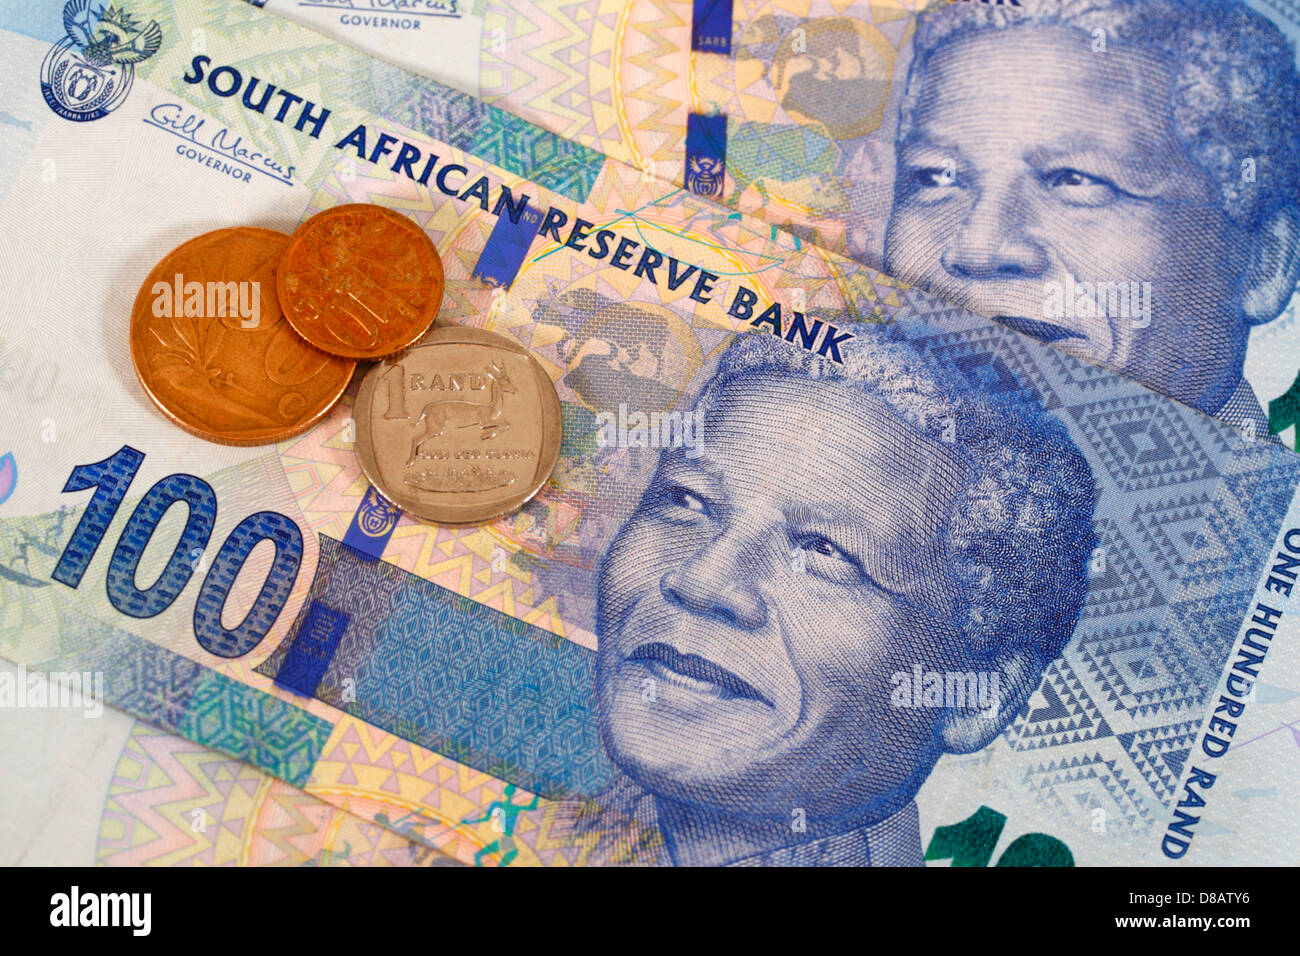 South African coins and new one hundred rand bank notes Stock Photo